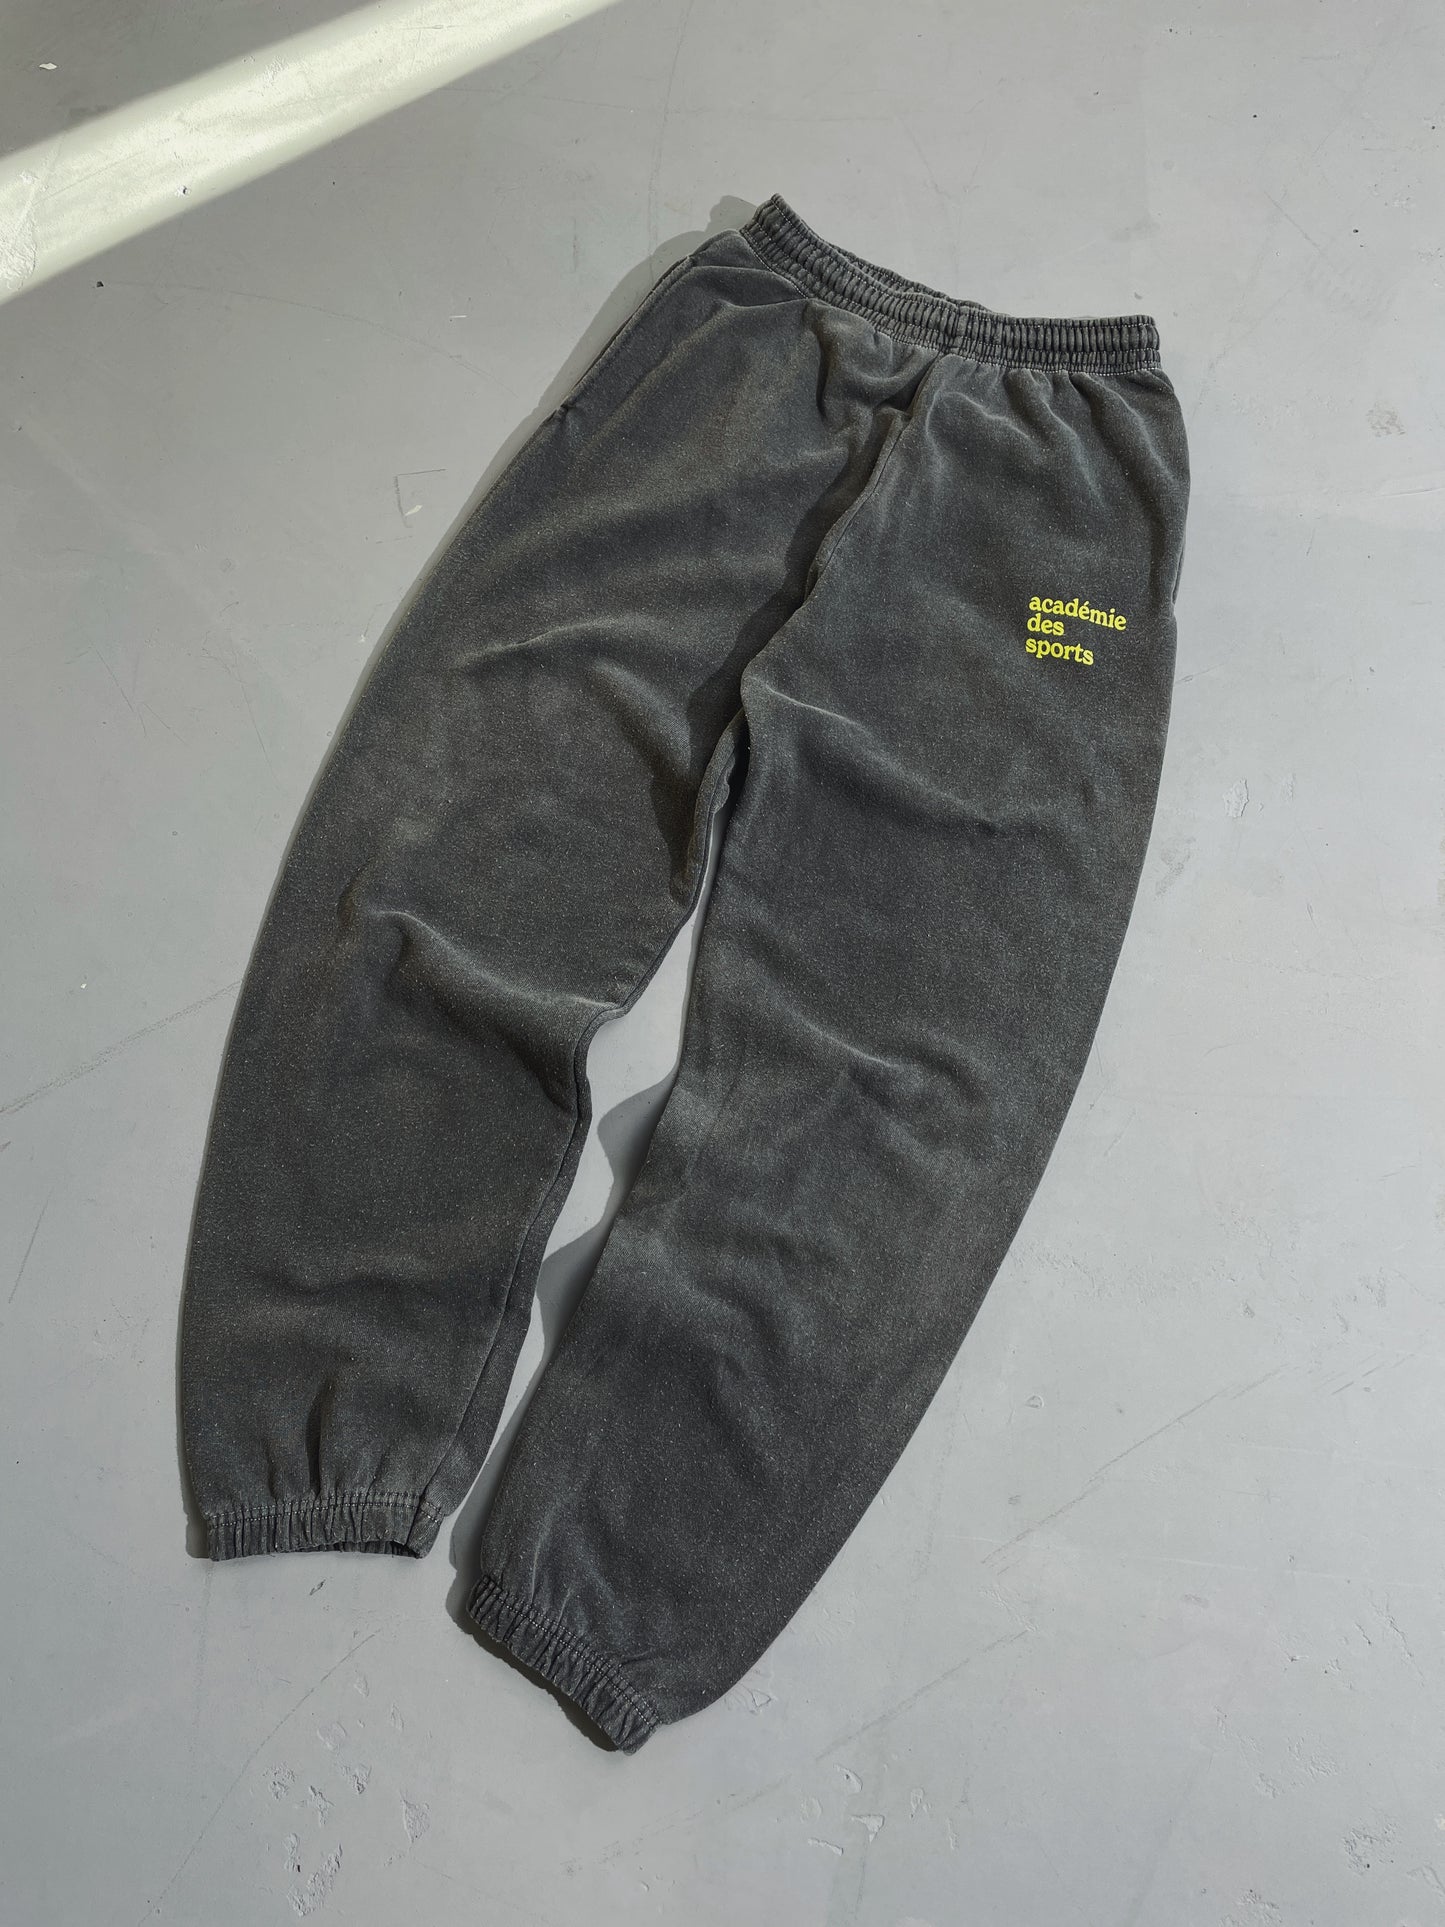 Vice 84 'Baseline' Joggers - Vintage Washed Black *BF 1 OF 100 EXCLUSIVE*